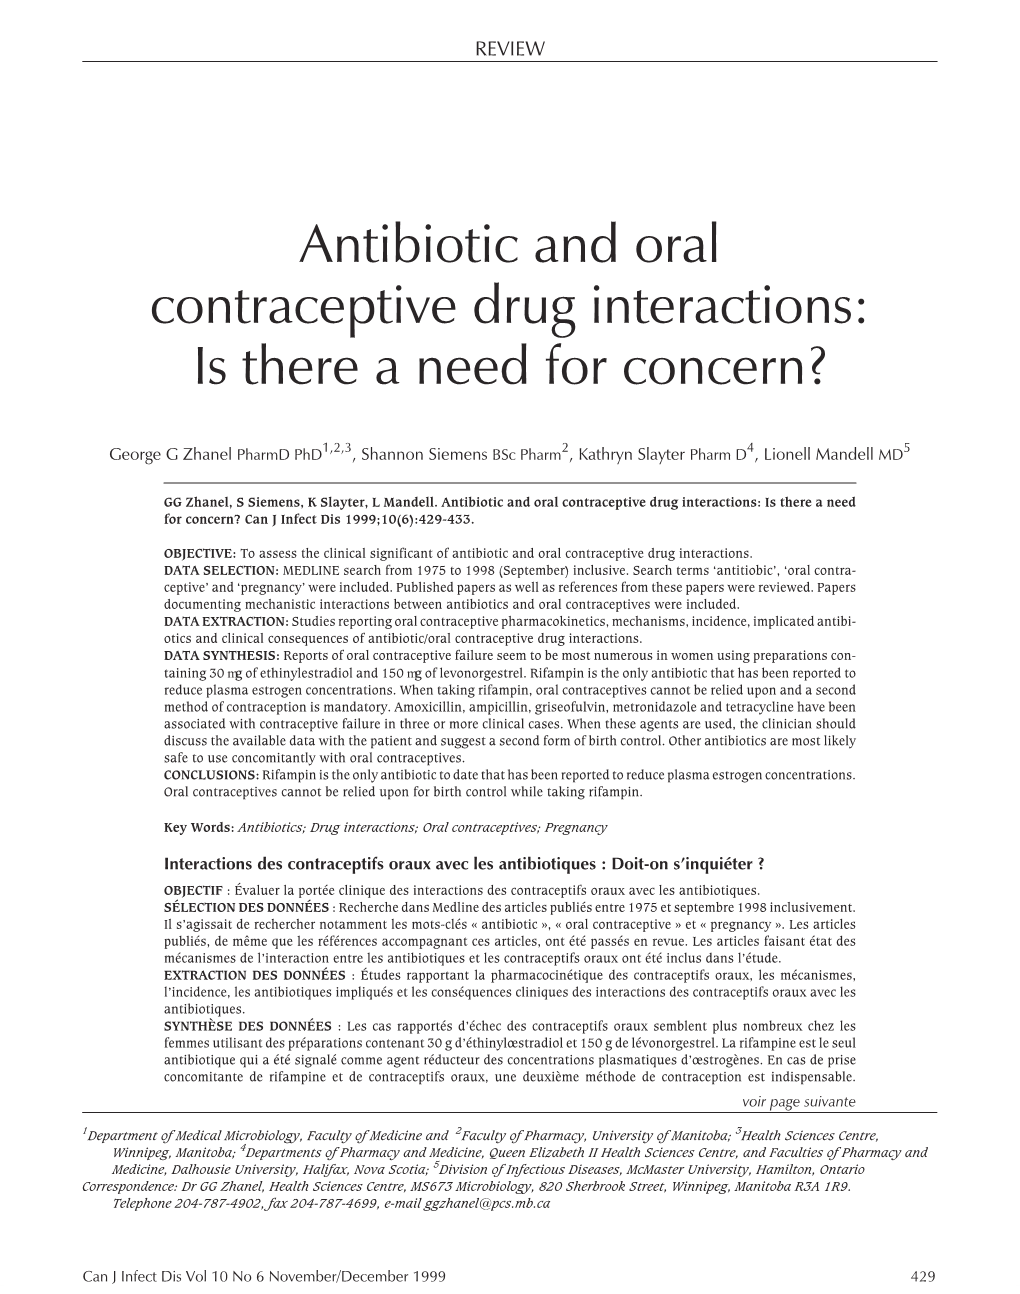 Antibiotic and Oral Contraceptive Drug Interactions: Is There a Need for Concern? Can J Infect Dis 1999;10(6):429-433